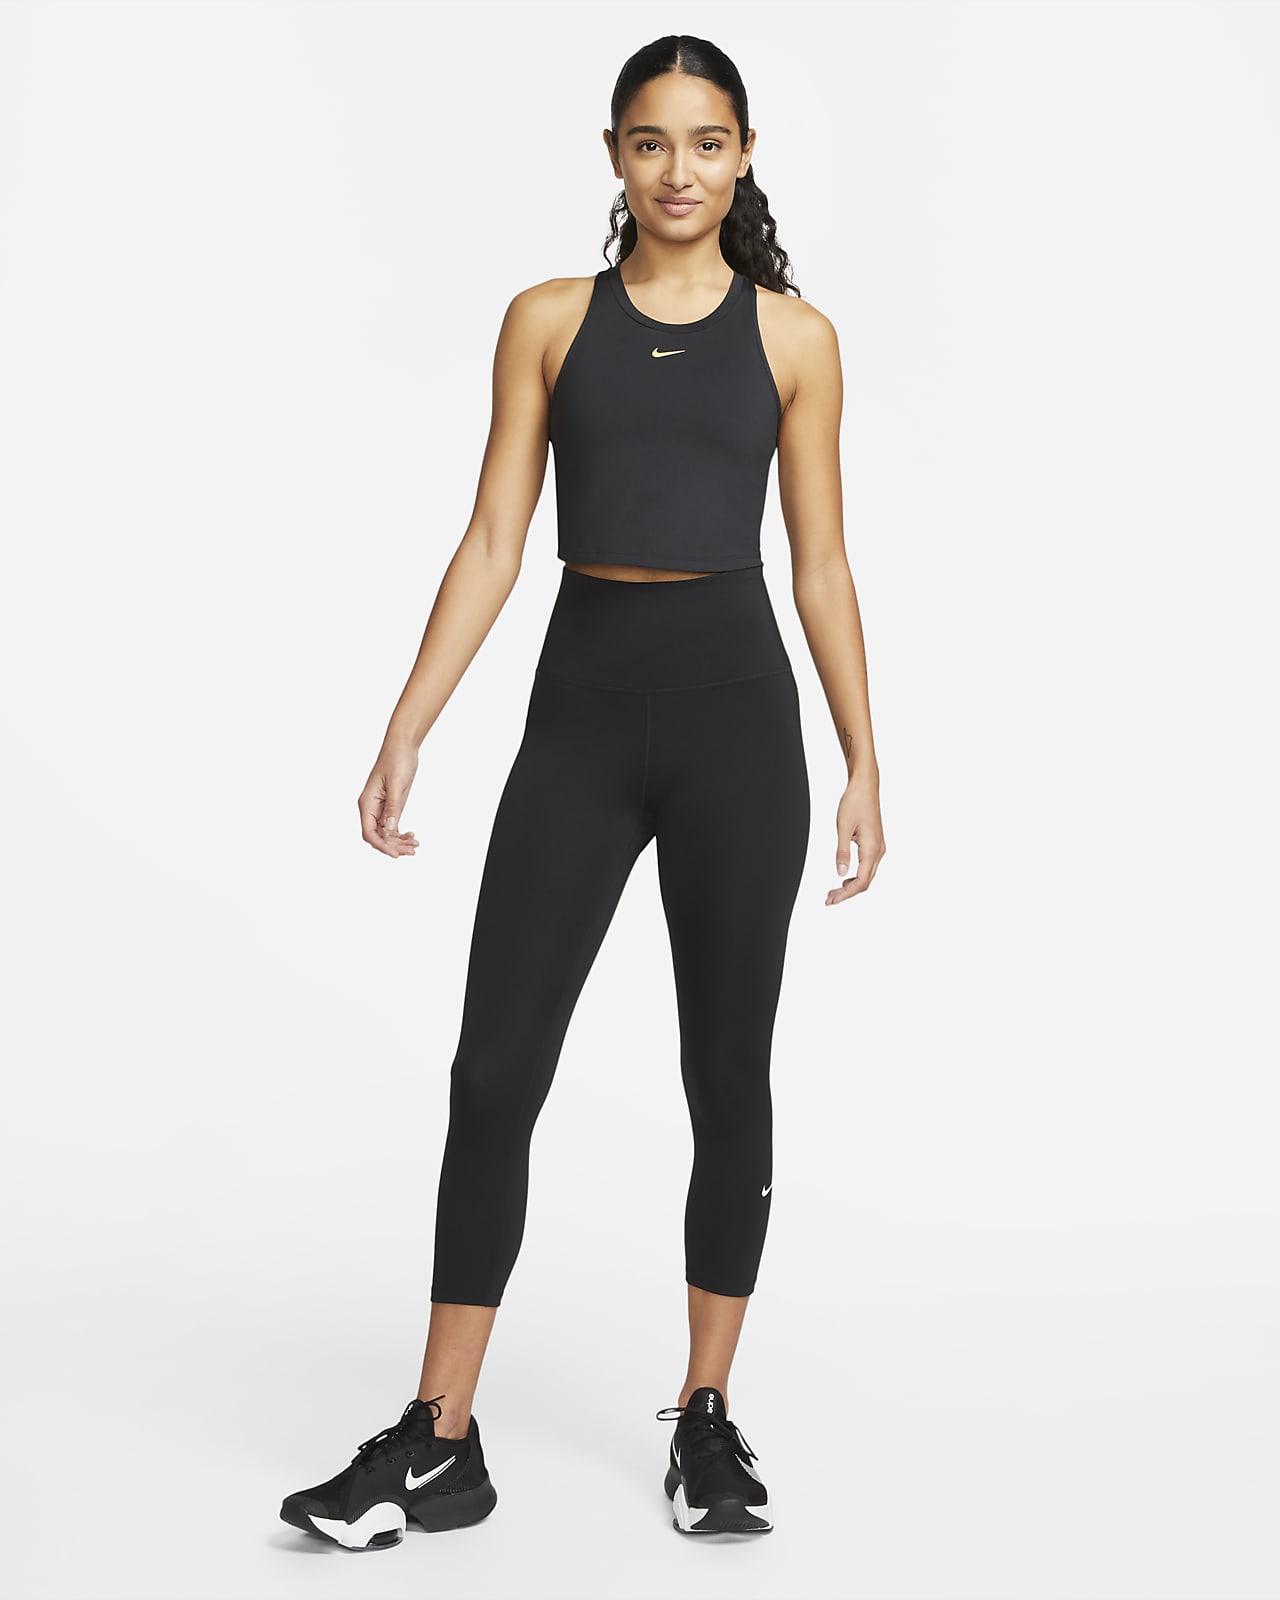 Nike cropped leggings dry fit small patterned